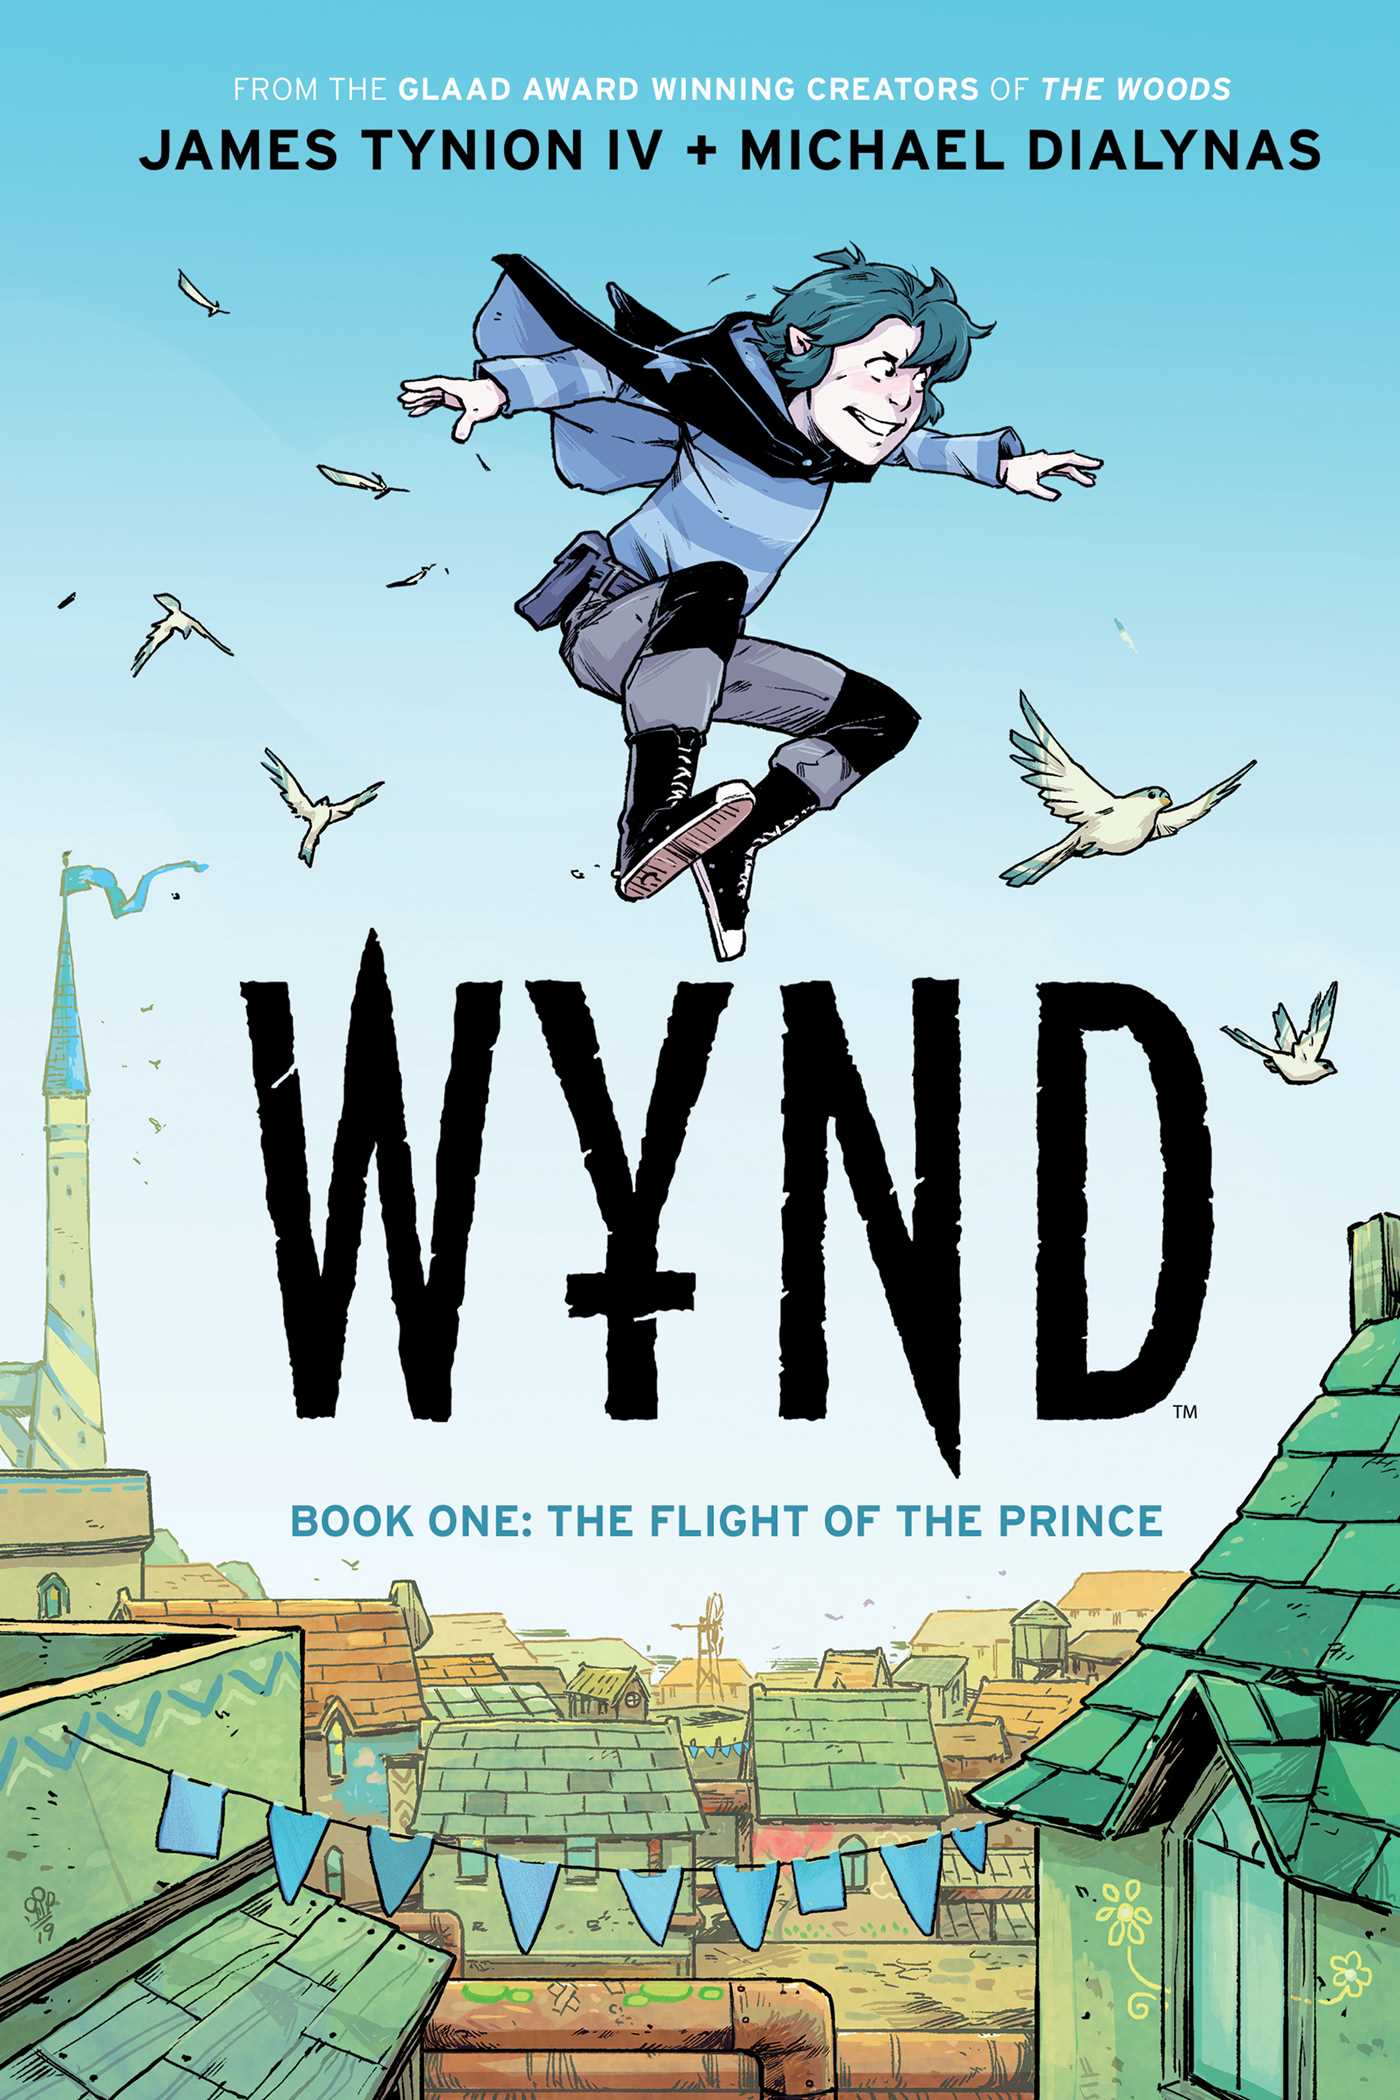 James Tynion IV, Michael Dialynas: The Flight of the Prince (GraphicNovel, Boom Entertainment)